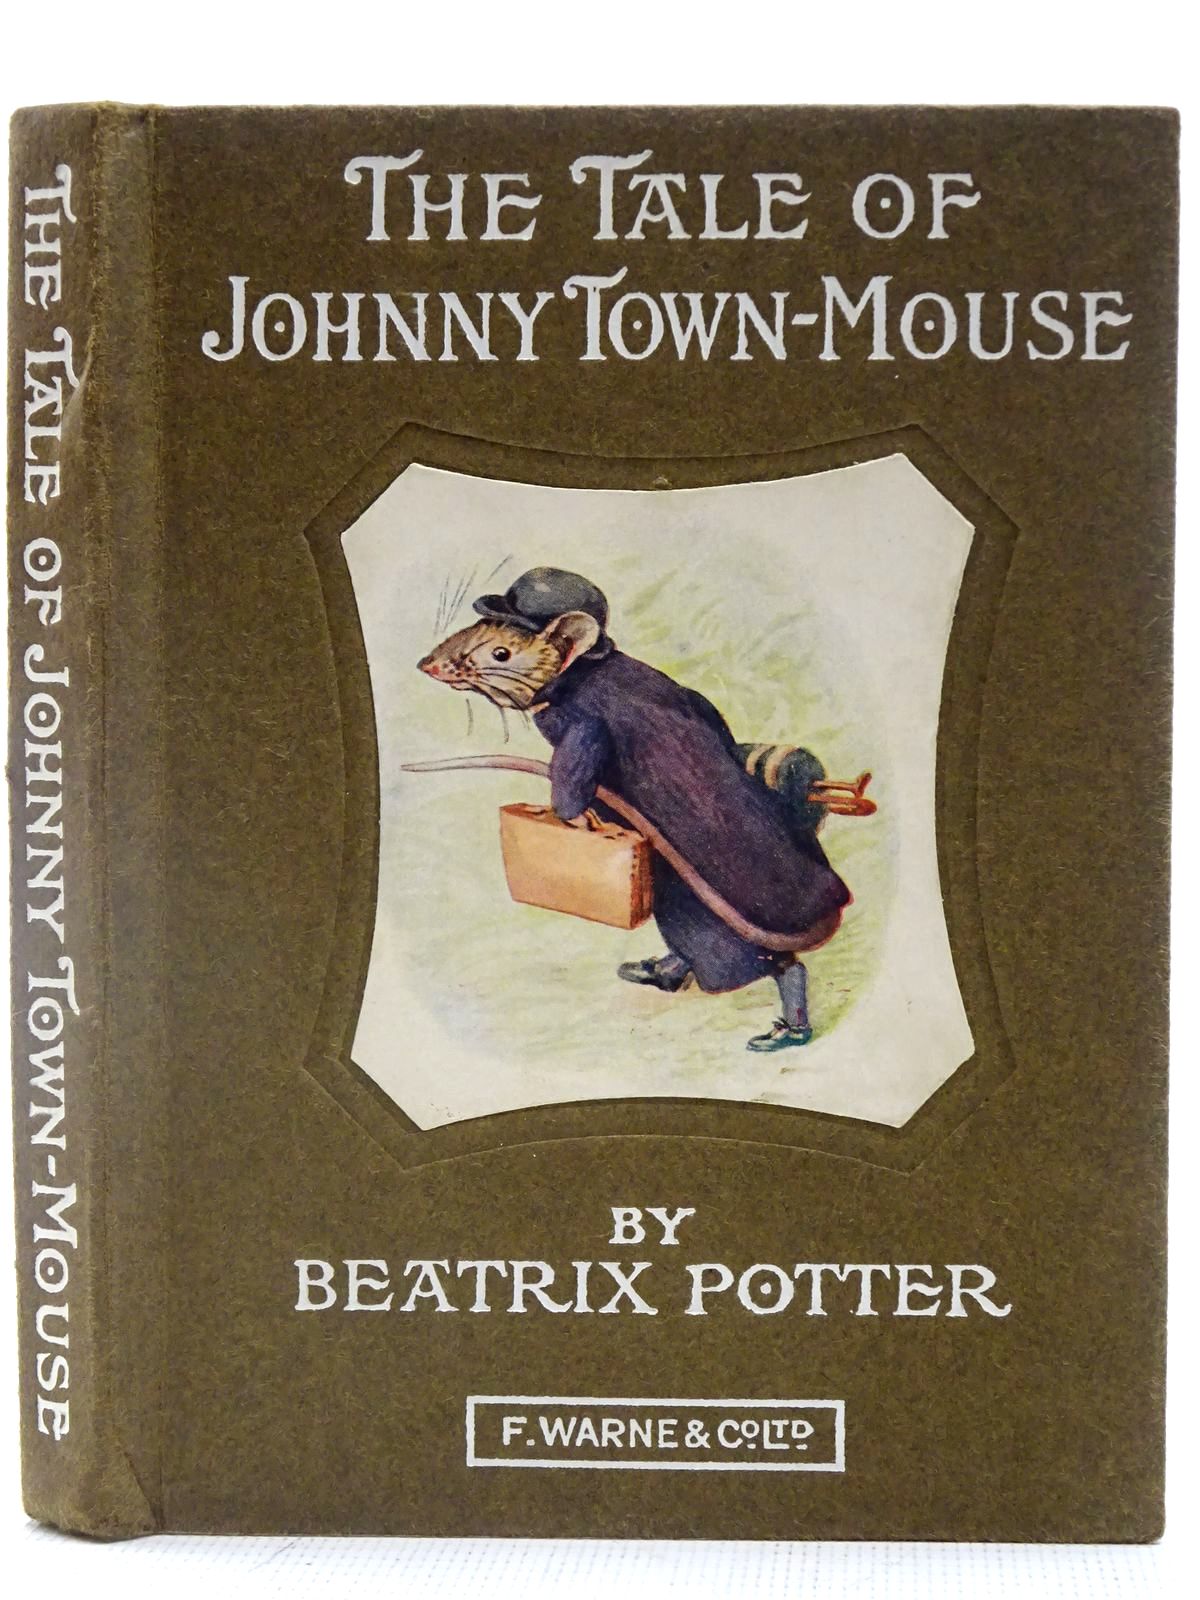 The Tale Of Johnny Town-mouse